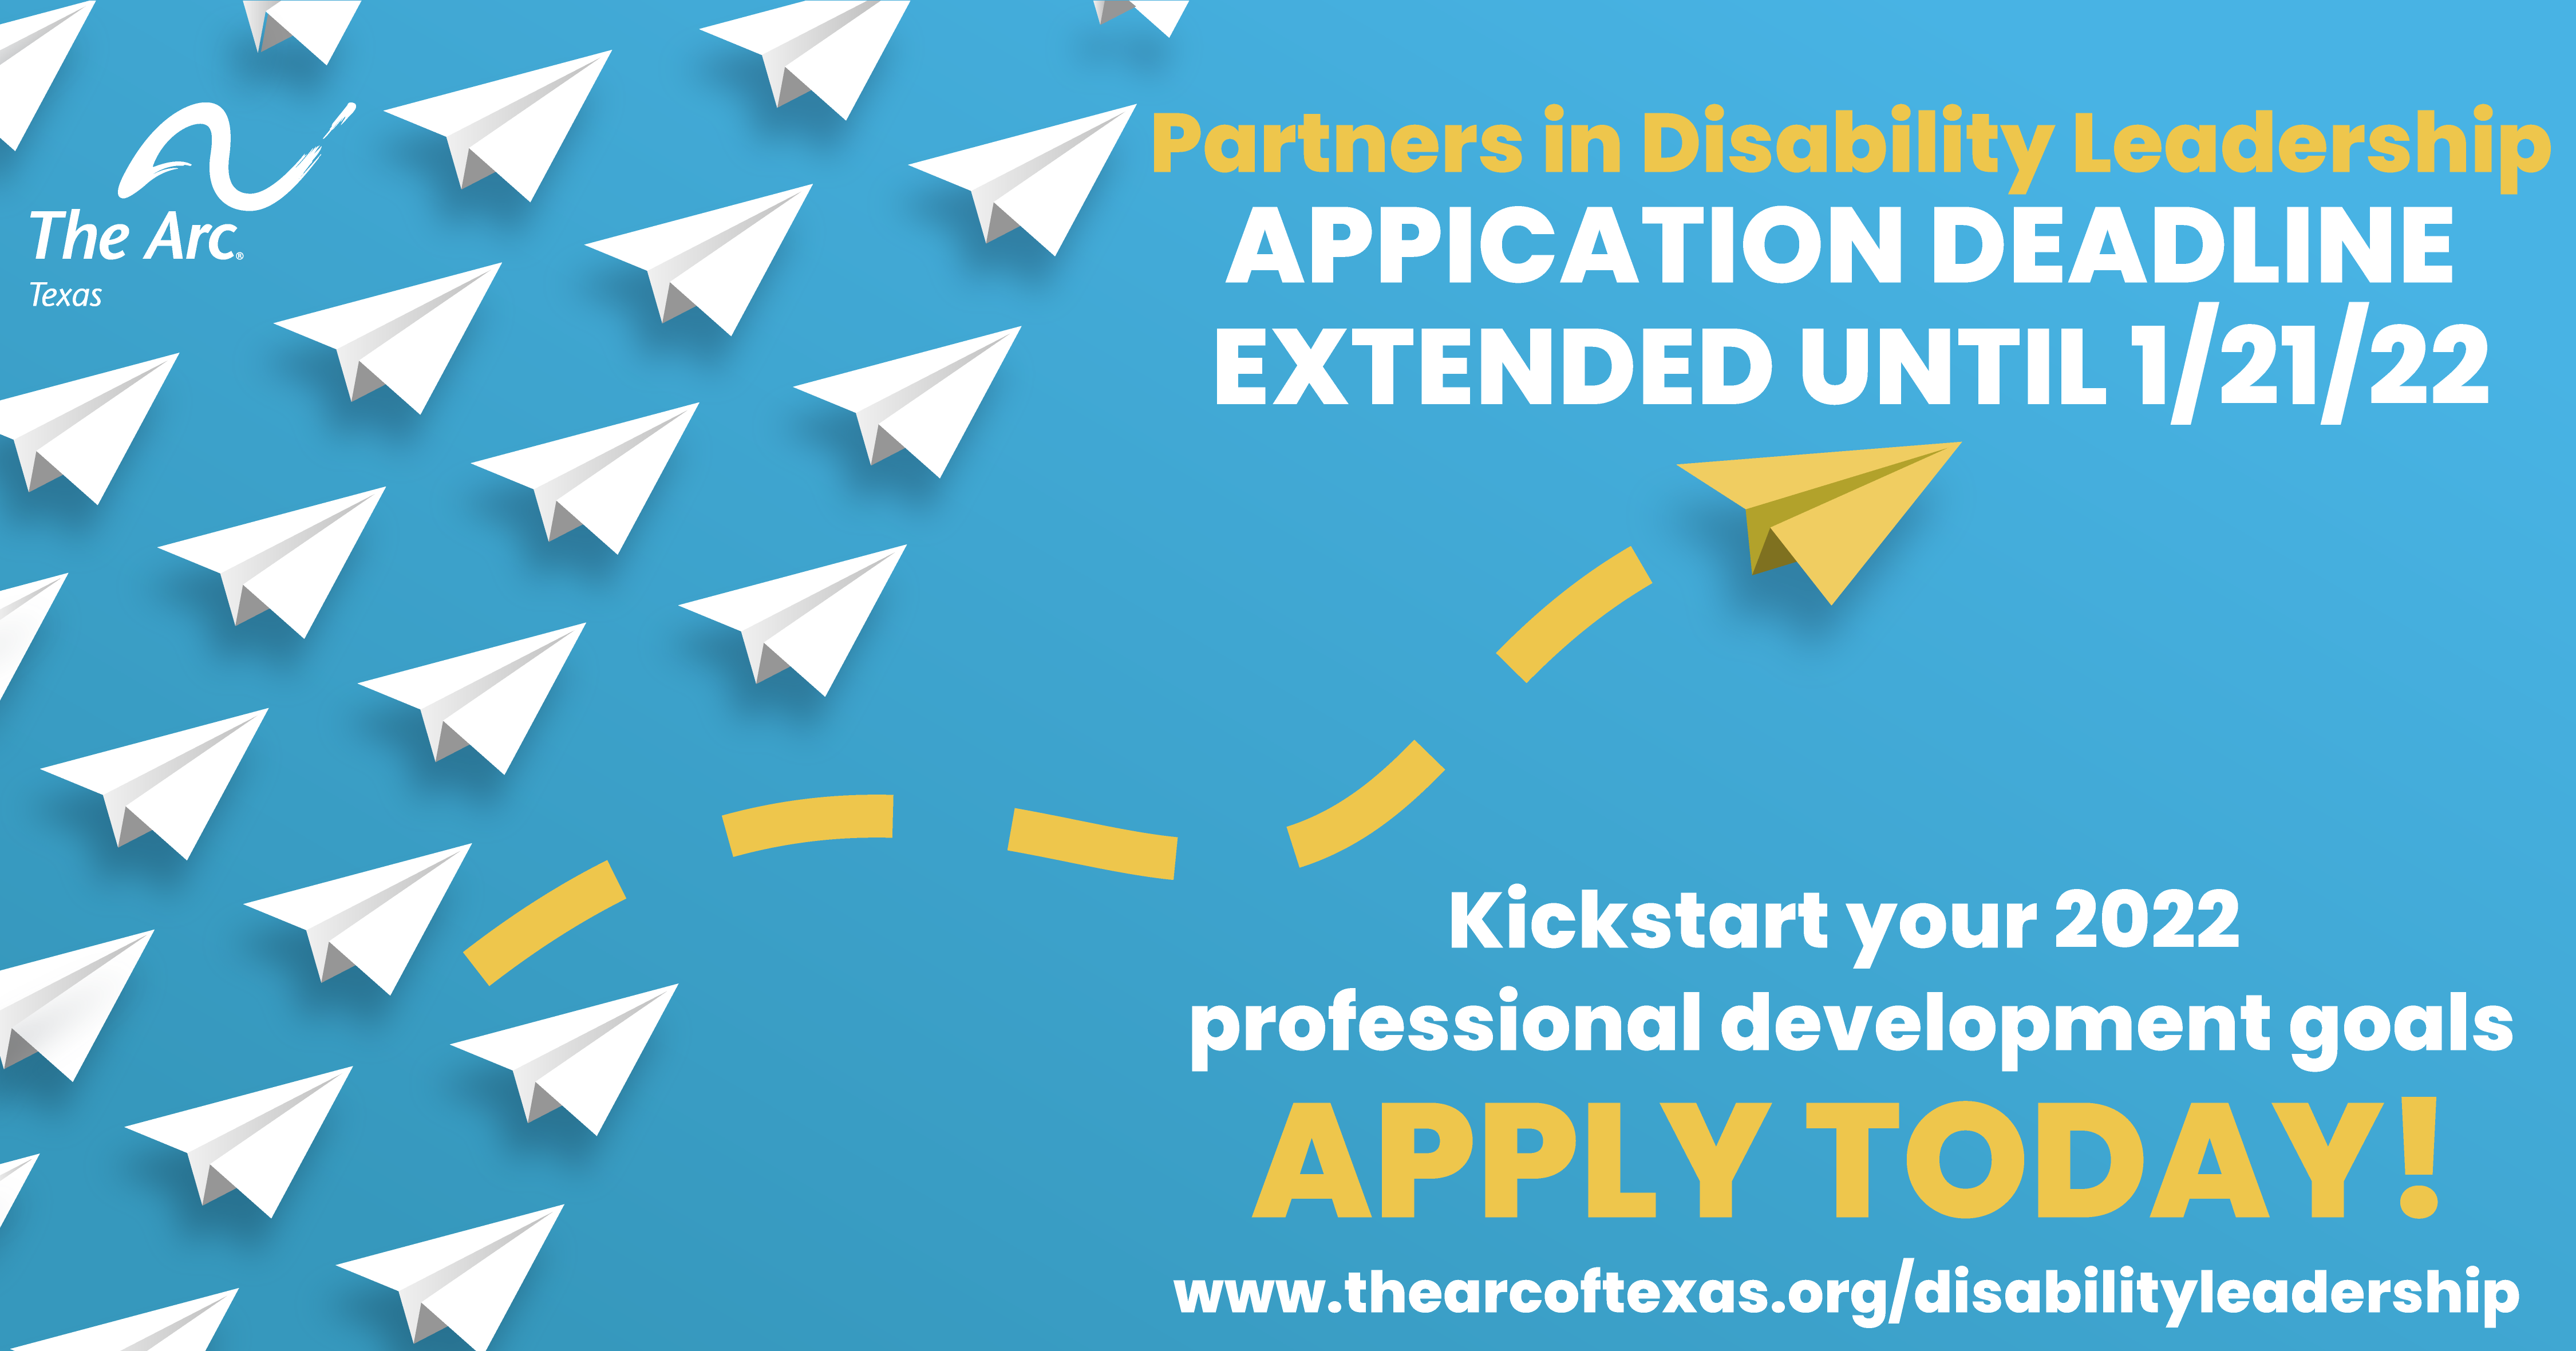 Light blue background with white paper airplanes in a straight line pointing to the right. One yellow paper airplane has left the line and is soaring to
the upper-right corner of the image. The Arc of Texas logo and text that says Apply Now! 2022 Partners in Disability Leadership www.thearcoftexas.org/disabilityleadership